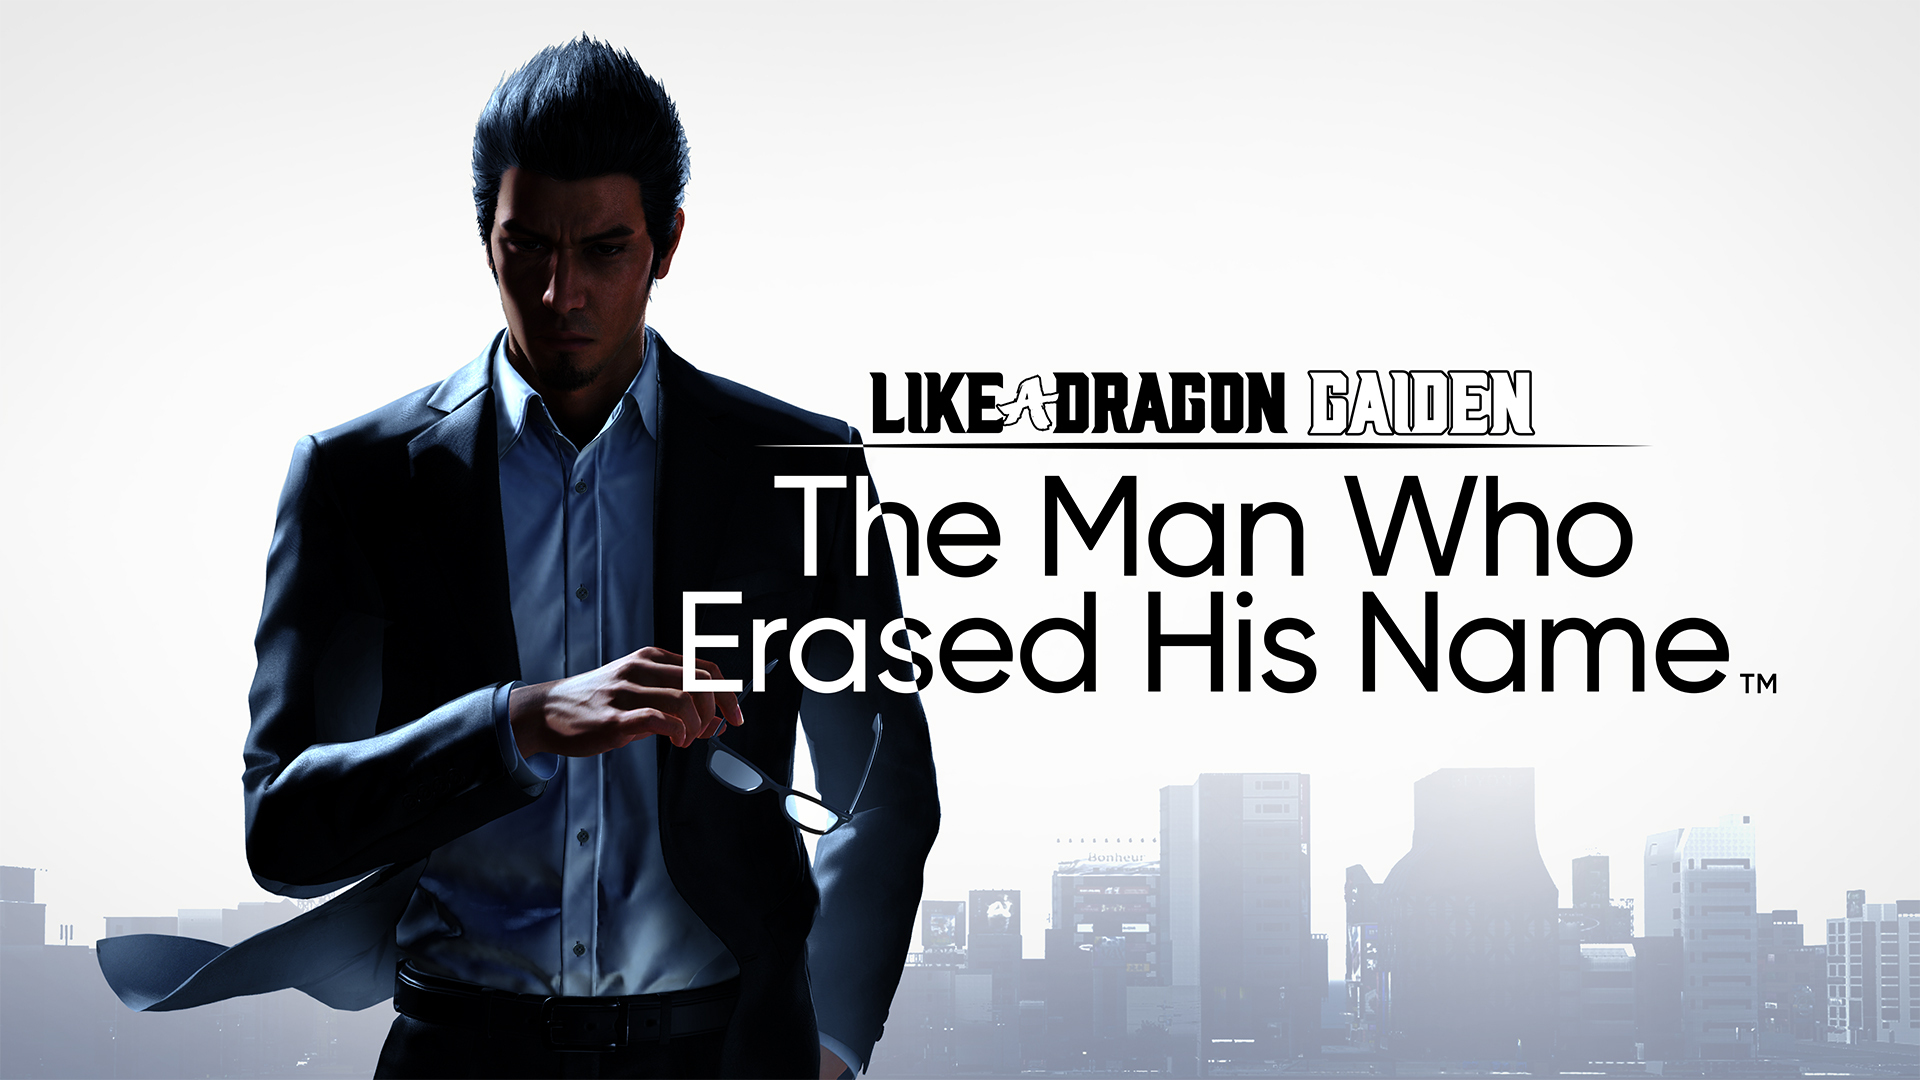 Like a Dragon Gaiden: The Man Who Erased His Name English Dub Coming this Month via Free Update